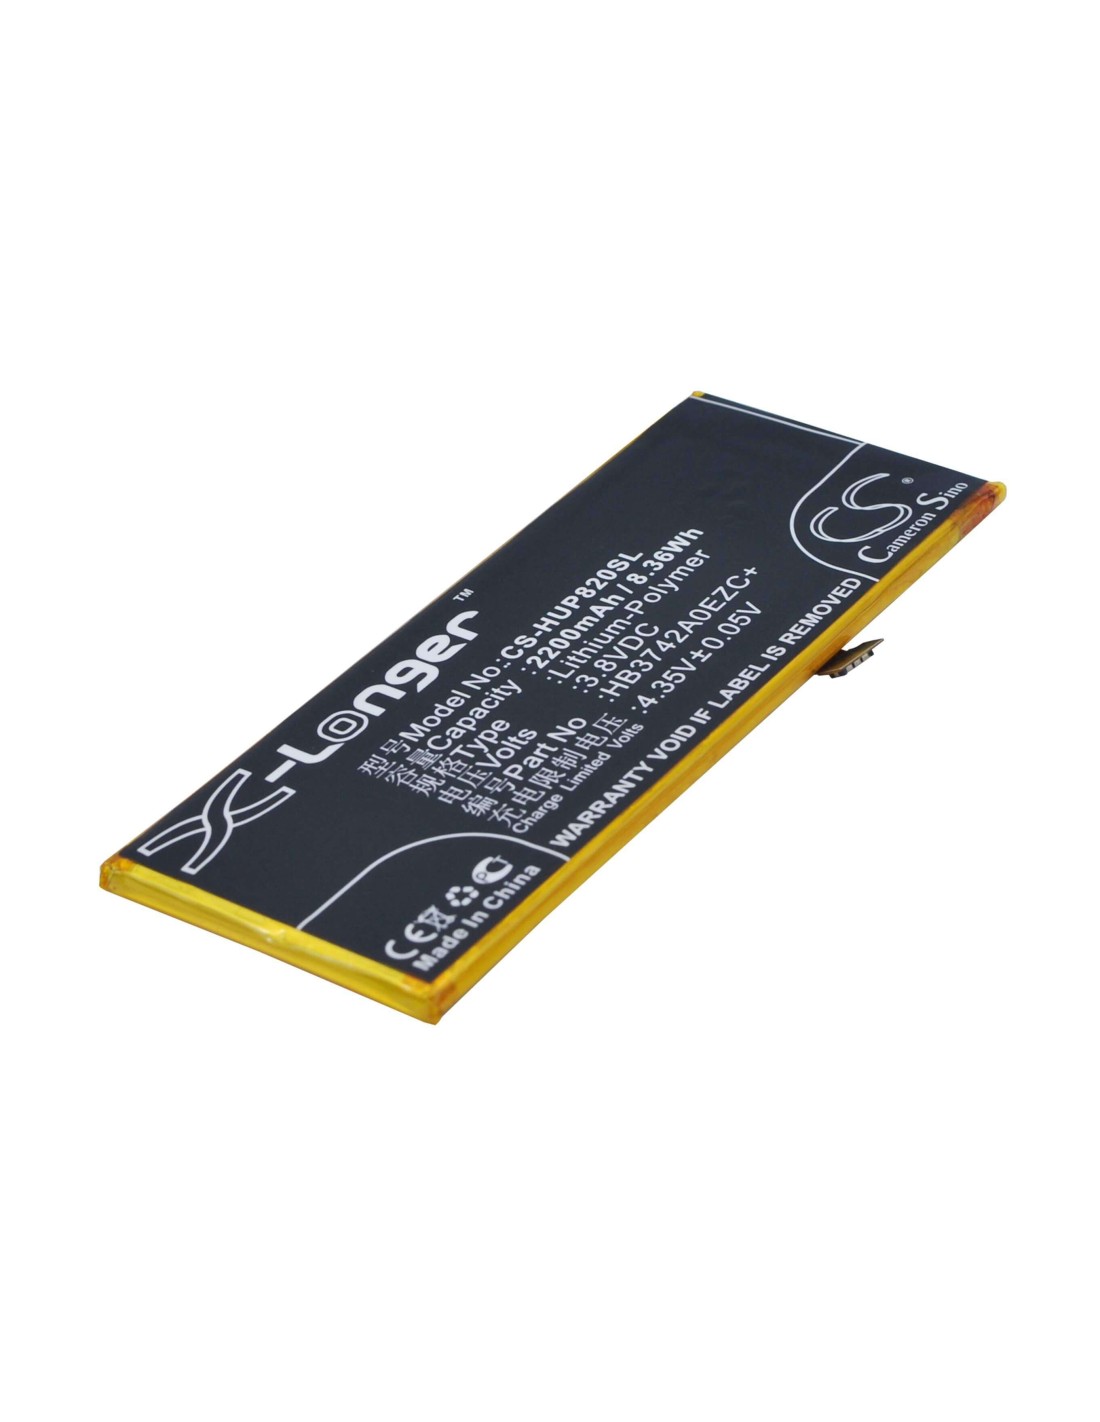 Battery for Huawei P8 Lite, ALE-L04, ALE-CL00 3.8V, 2200mAh - 8.36Wh